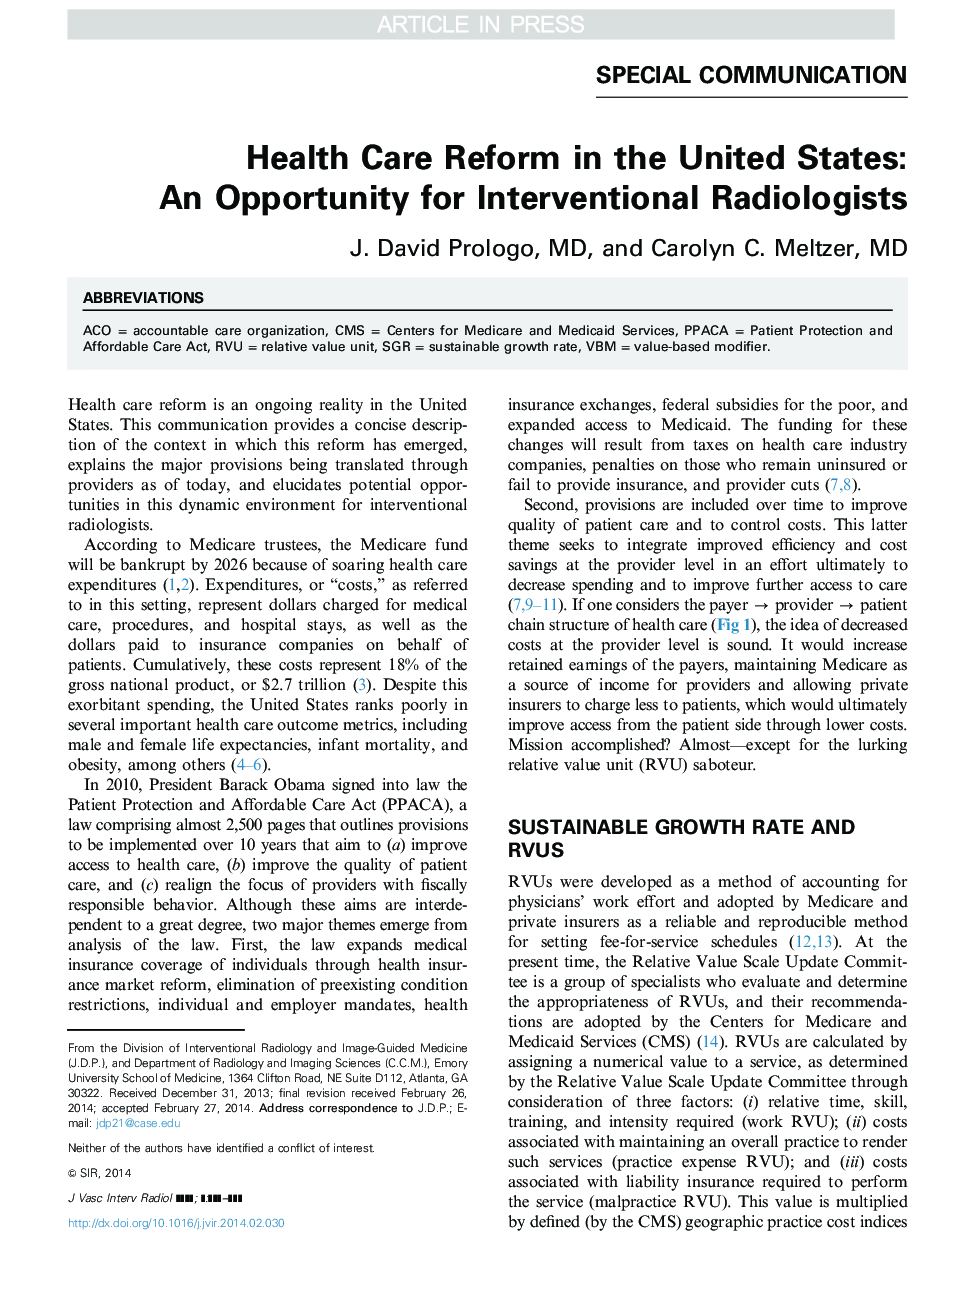 Health Care Reform in the United States: An Opportunity for Interventional Radiologists